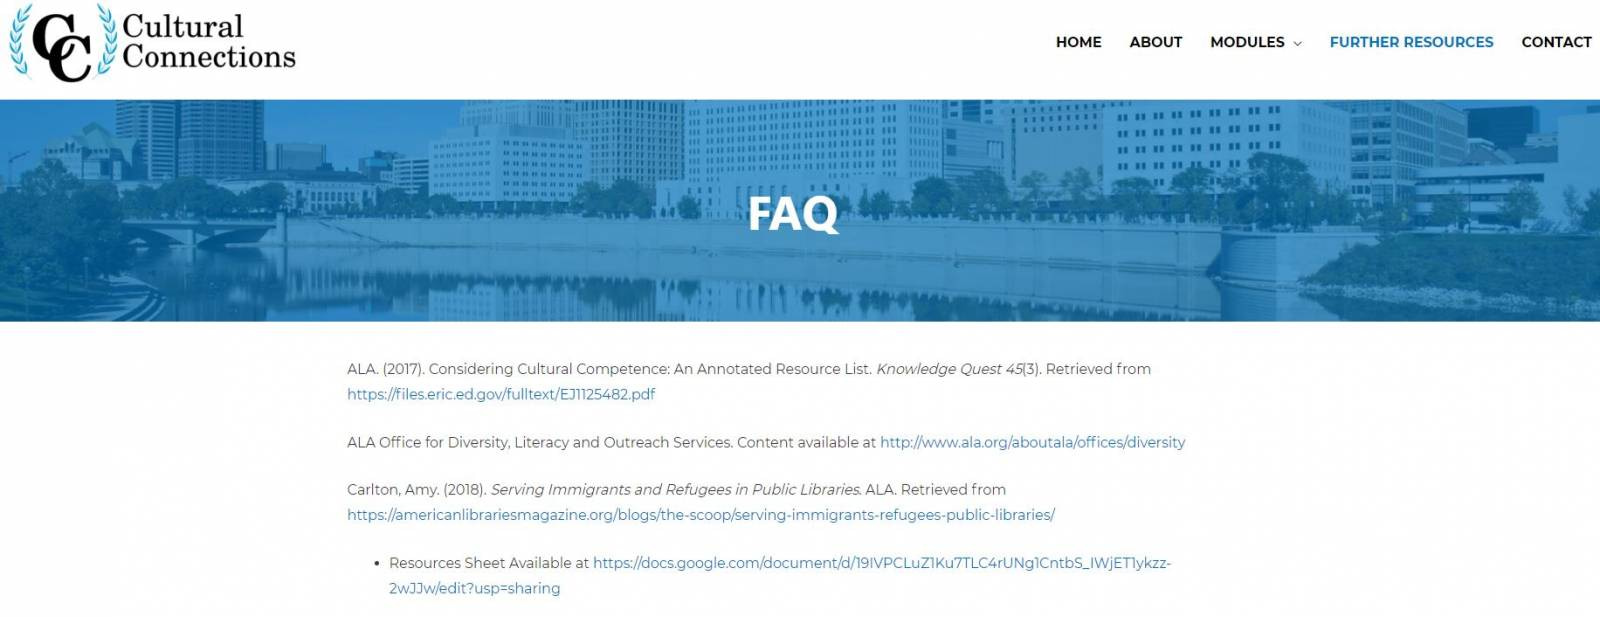 frequently asked questions page